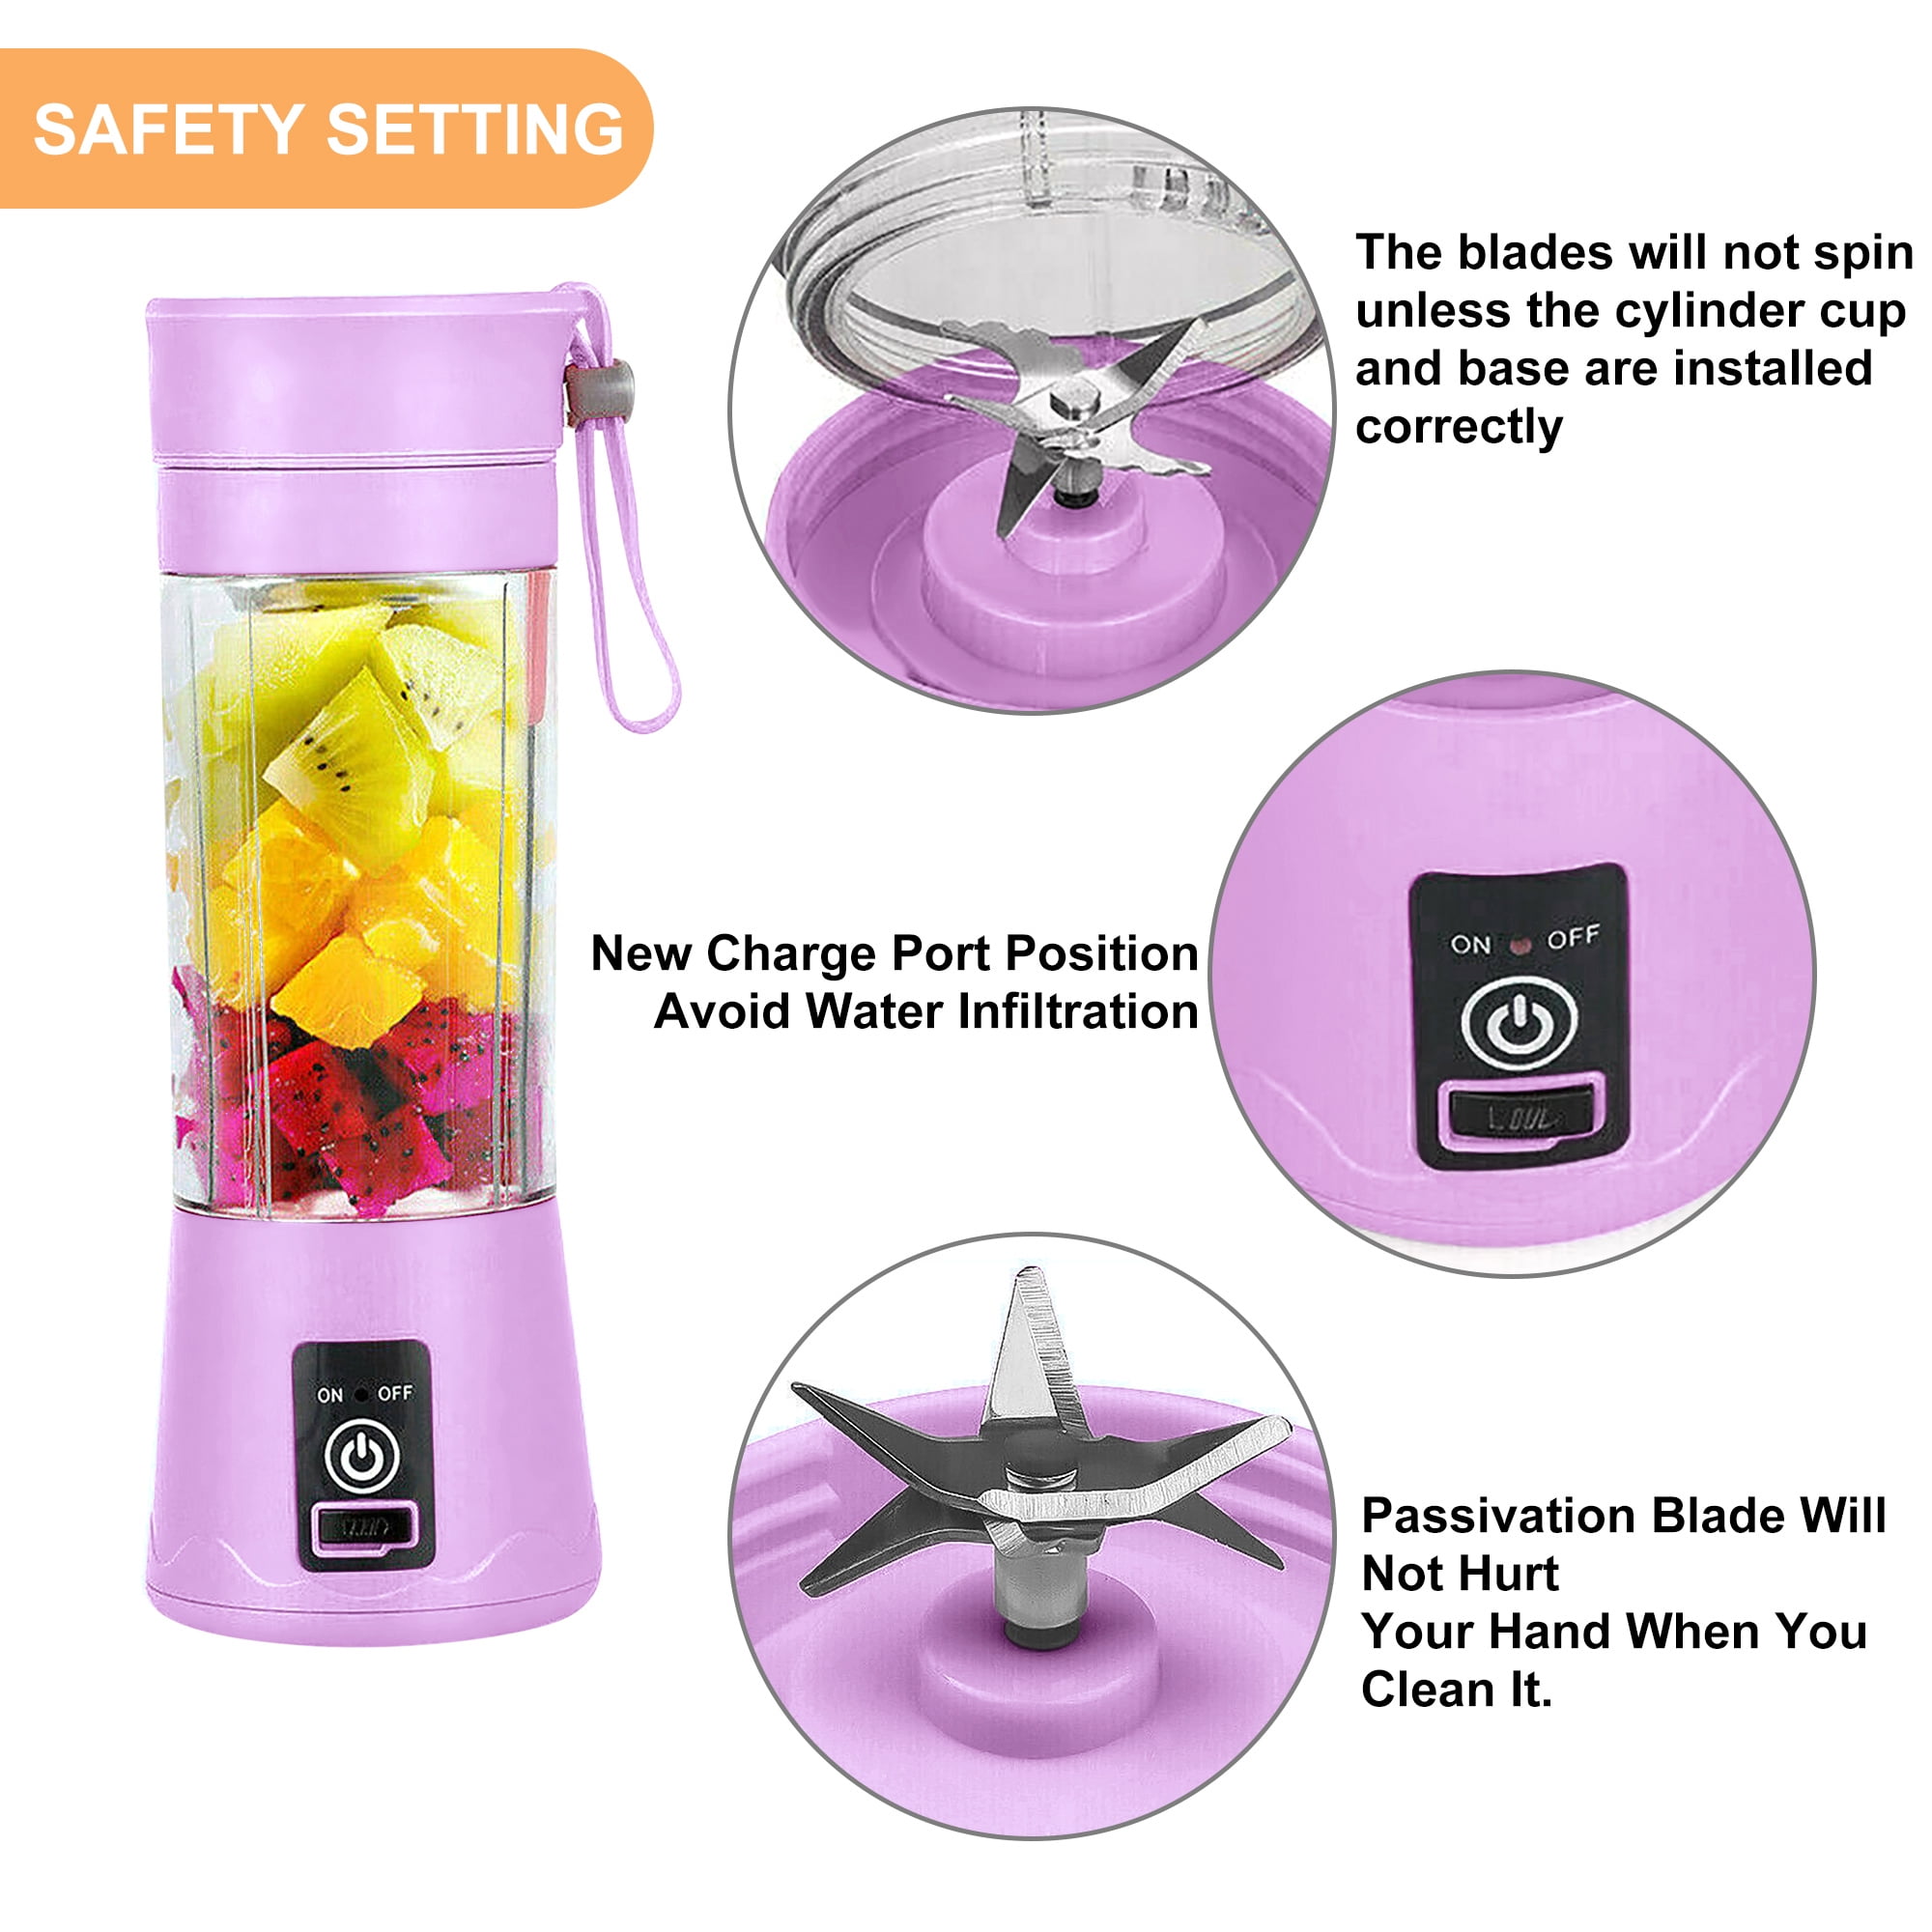 SUGFACY Personal Size Blender, Portable Blender, Battery Powered USB  Blender, with Four Blades, Mini Blender Travel Bottle for Juice, Shakes,  and